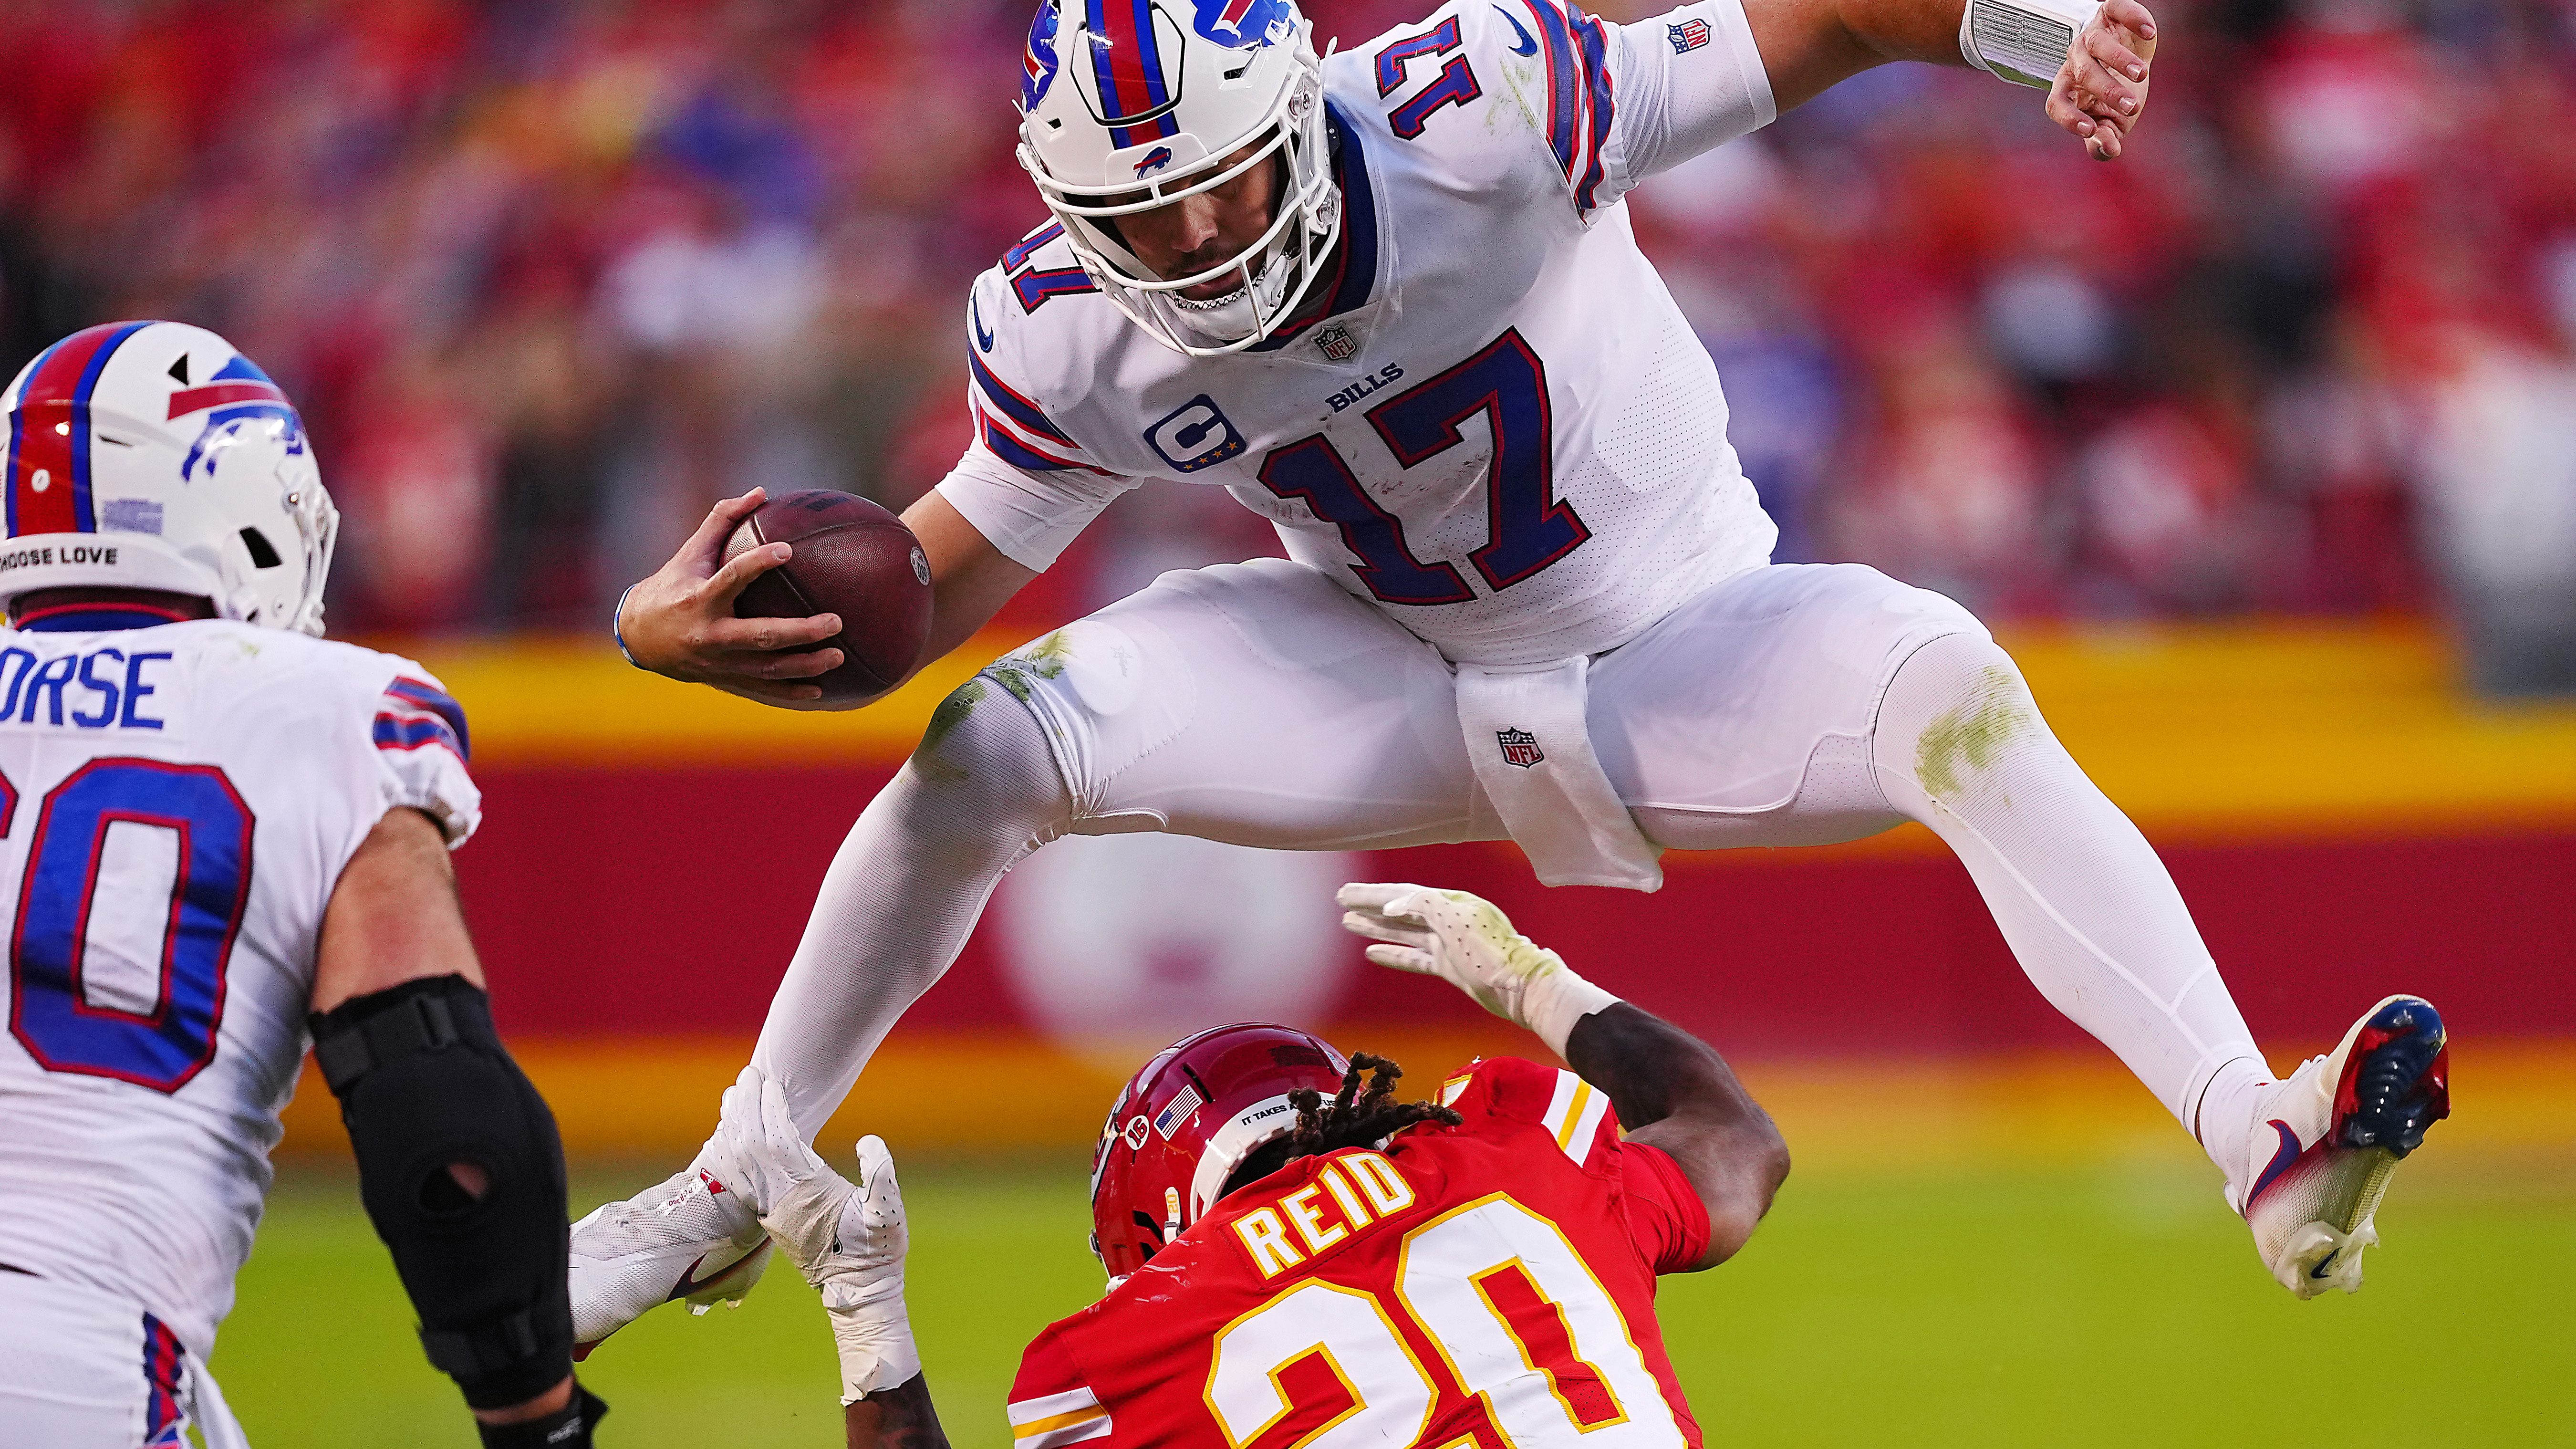 Top takeaways from the Buffalo Bills victory over the Green Bay Packers